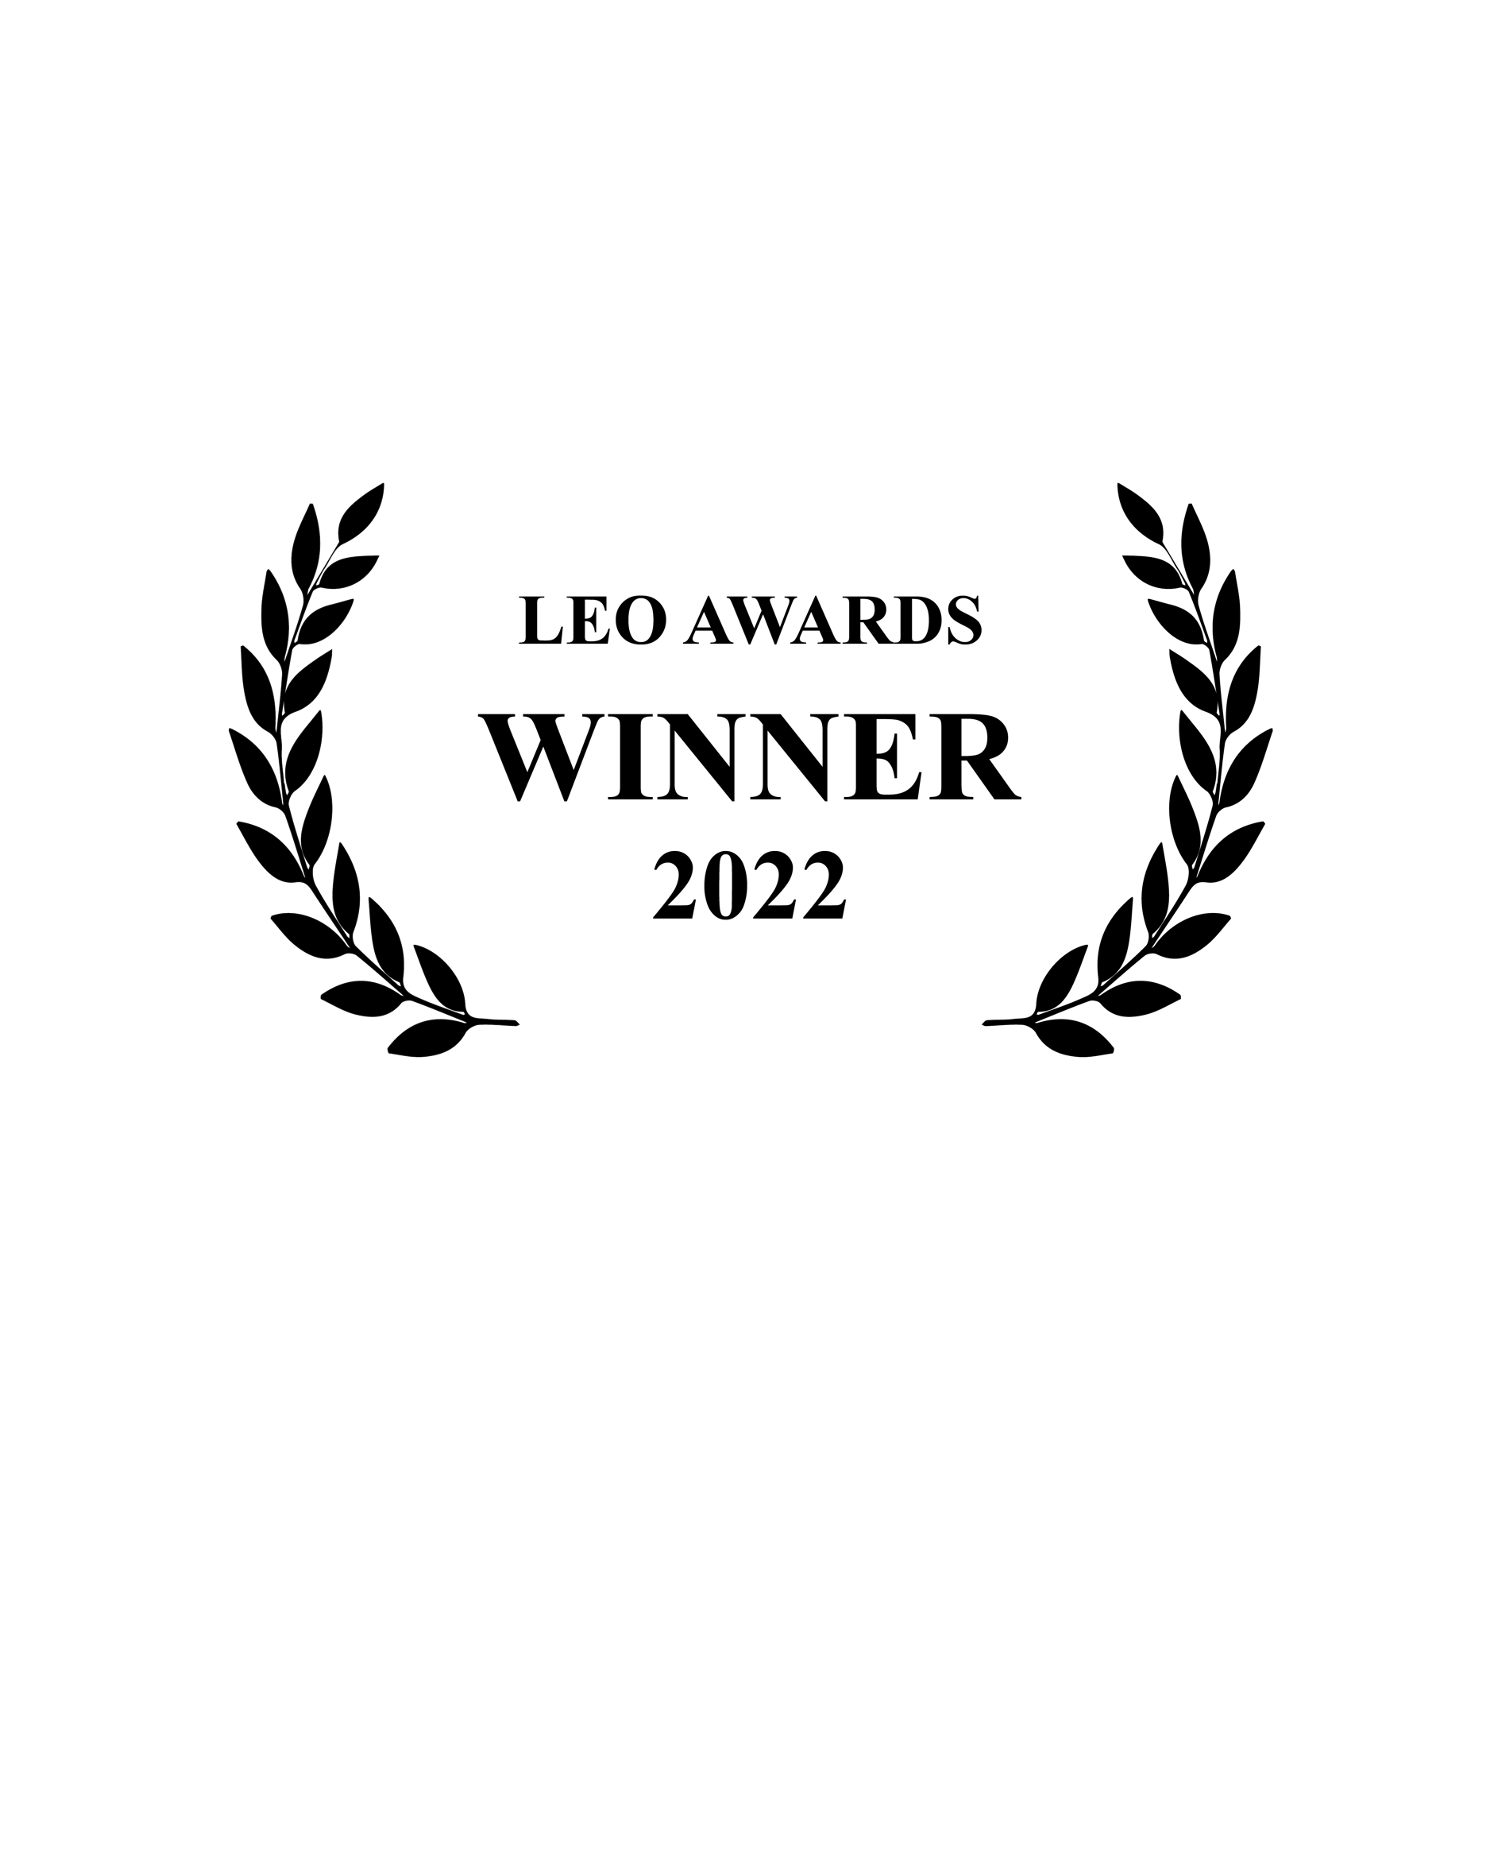 'And the Leo Award goes to...' core news picture